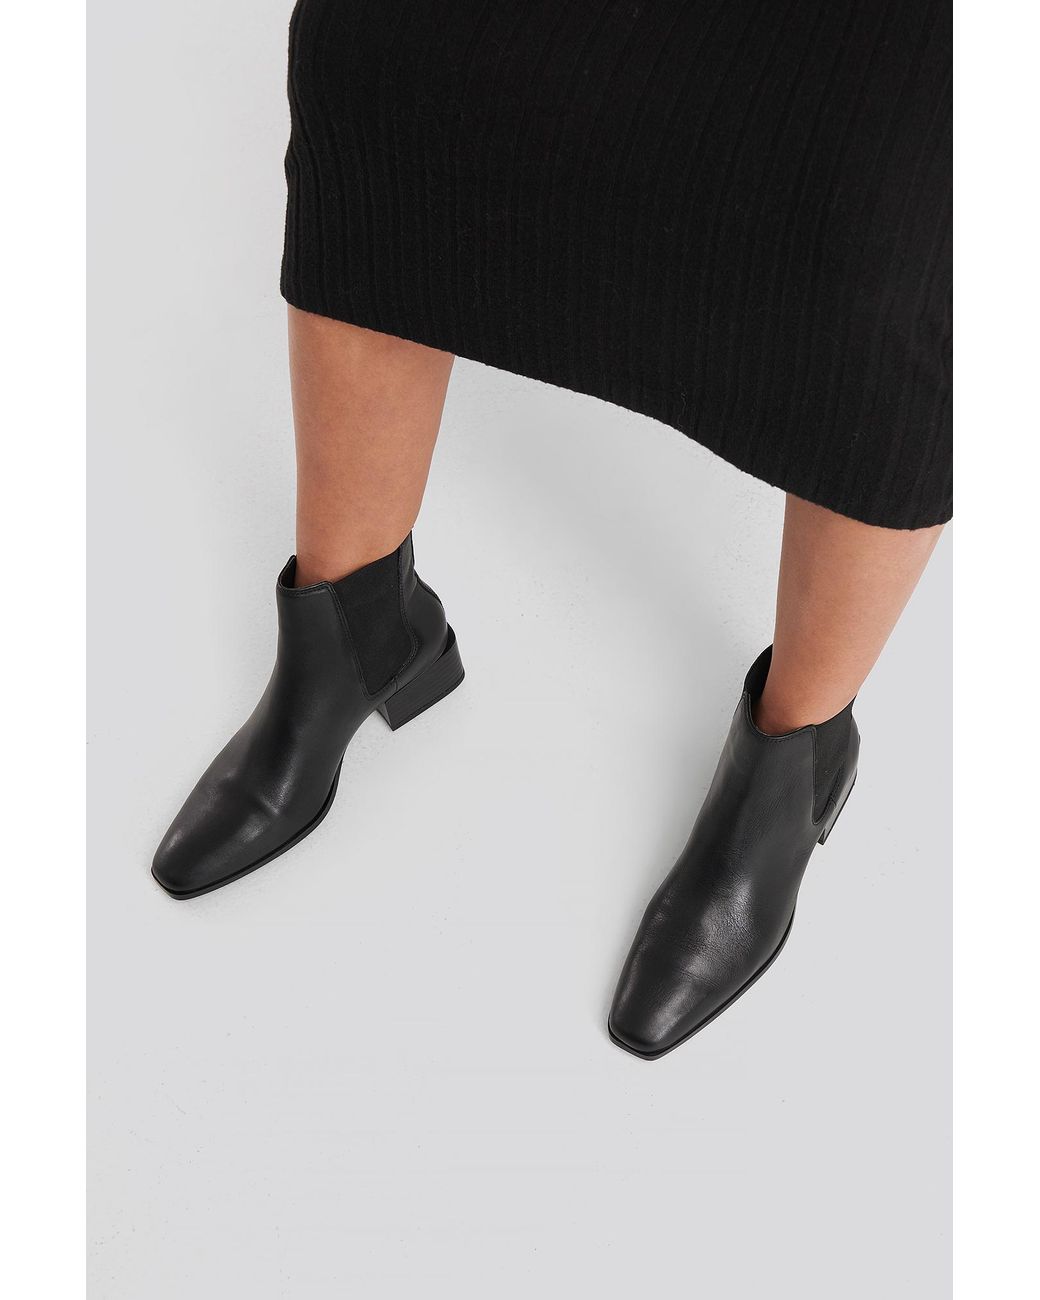 Mango Black Mess Ankle Boots | Lyst